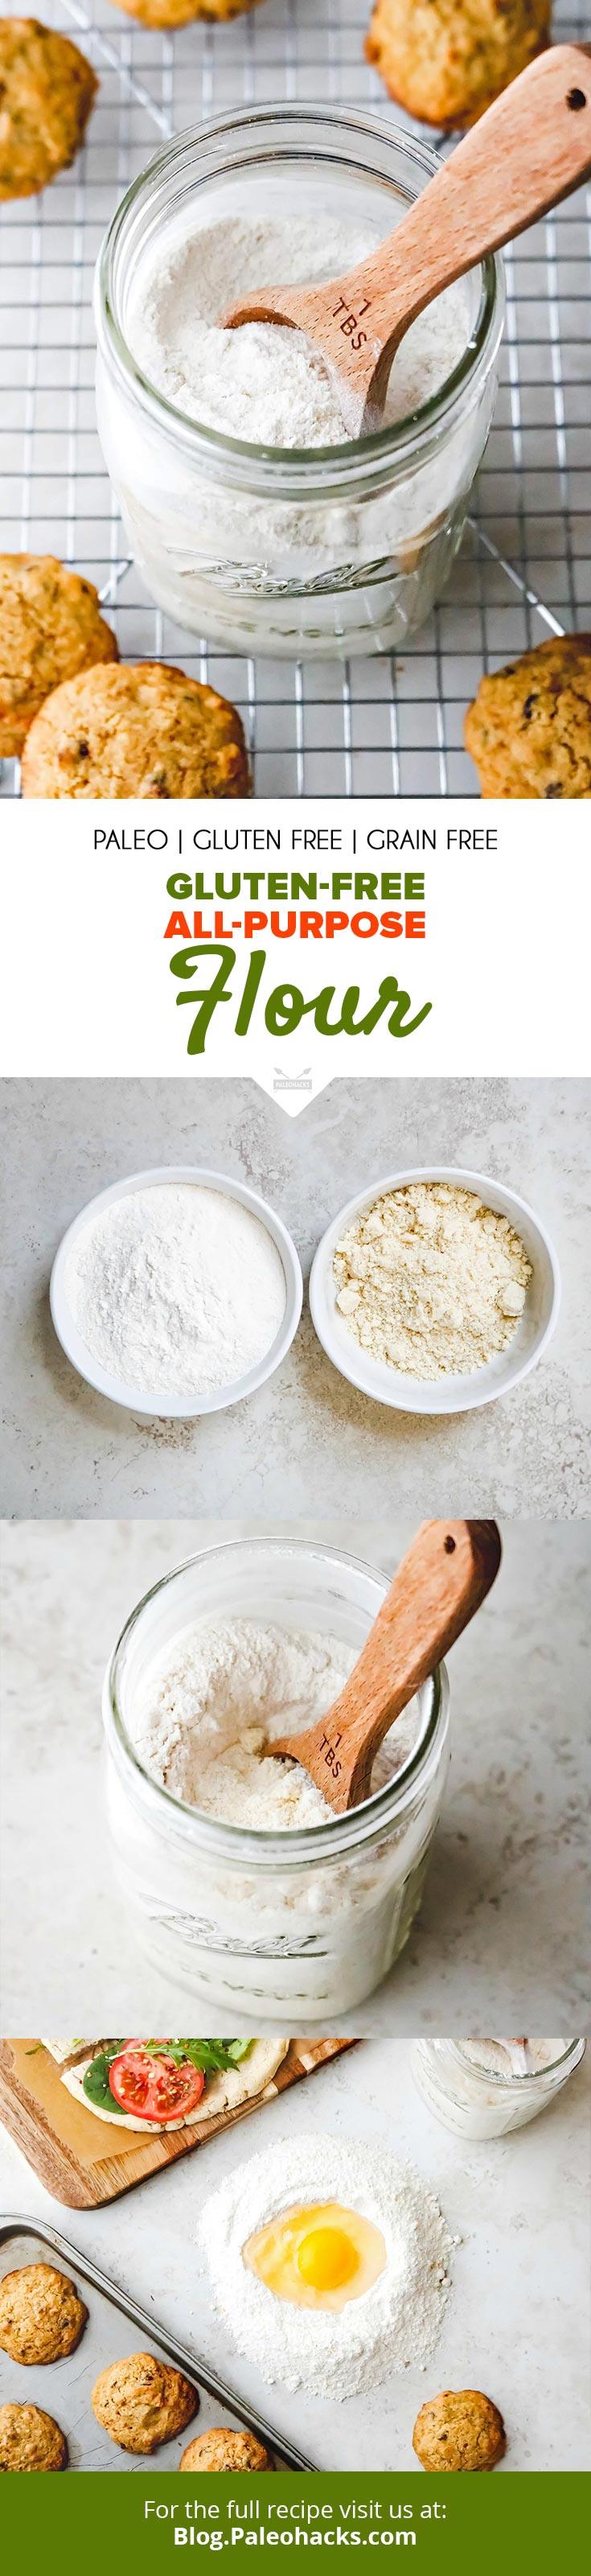 Get ready for a Paleo All-Purpose Flour Mix you can use for all of your essential baking needs! Guaranteed to make you life easier the next time you bake.